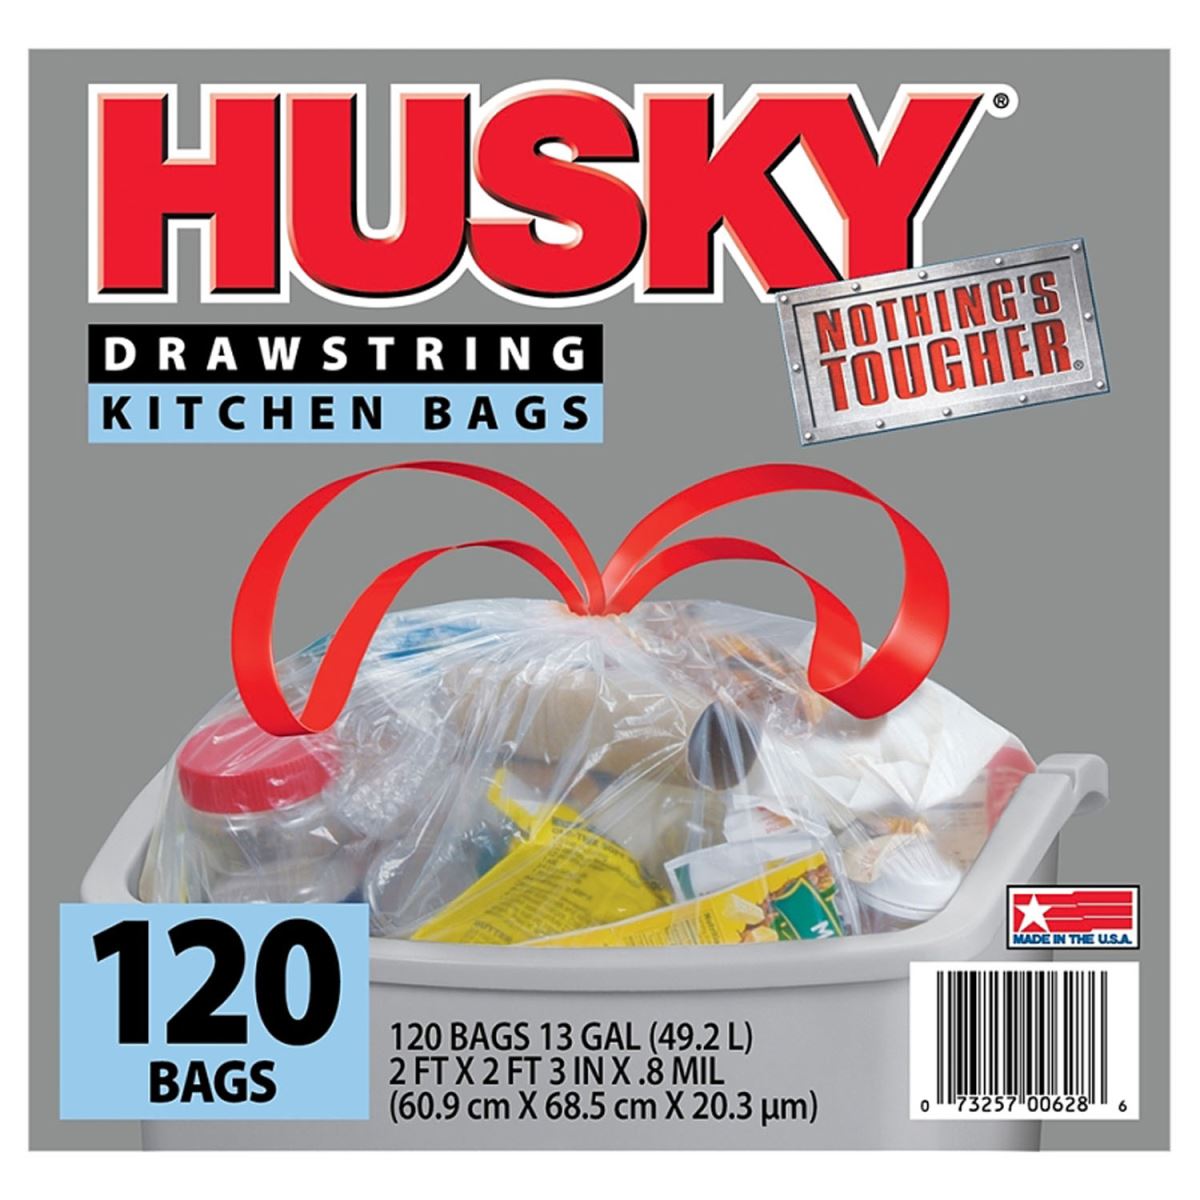 13 GALLON TRASH BAGS 1 FT. 11-3/4 IN. LONG X 2 FT. 5 IN WIDE 120 COUNT BOX